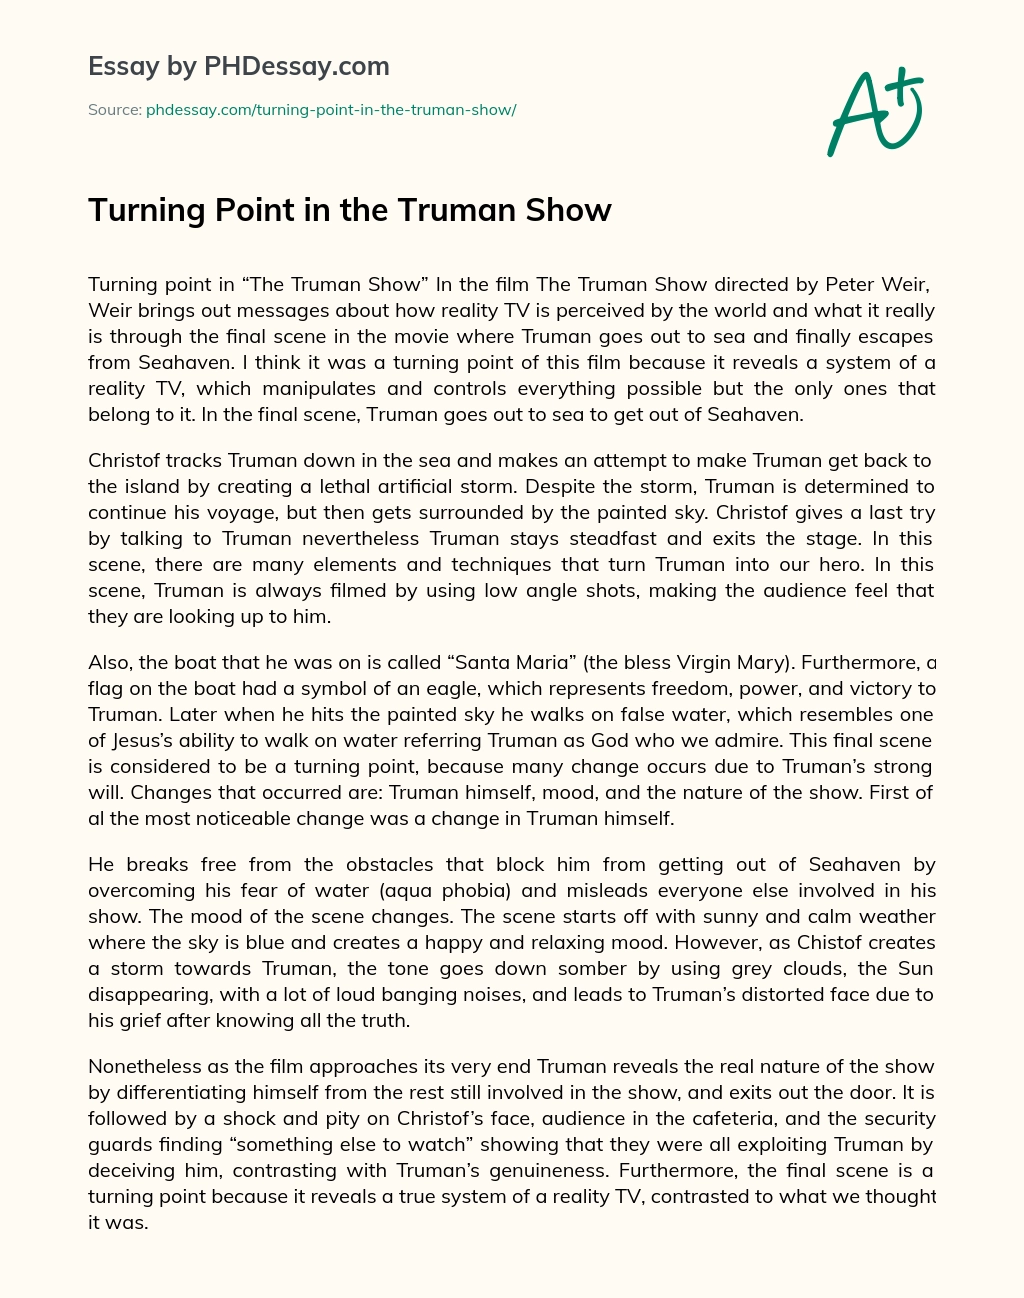 Turning Point in the Truman Show essay